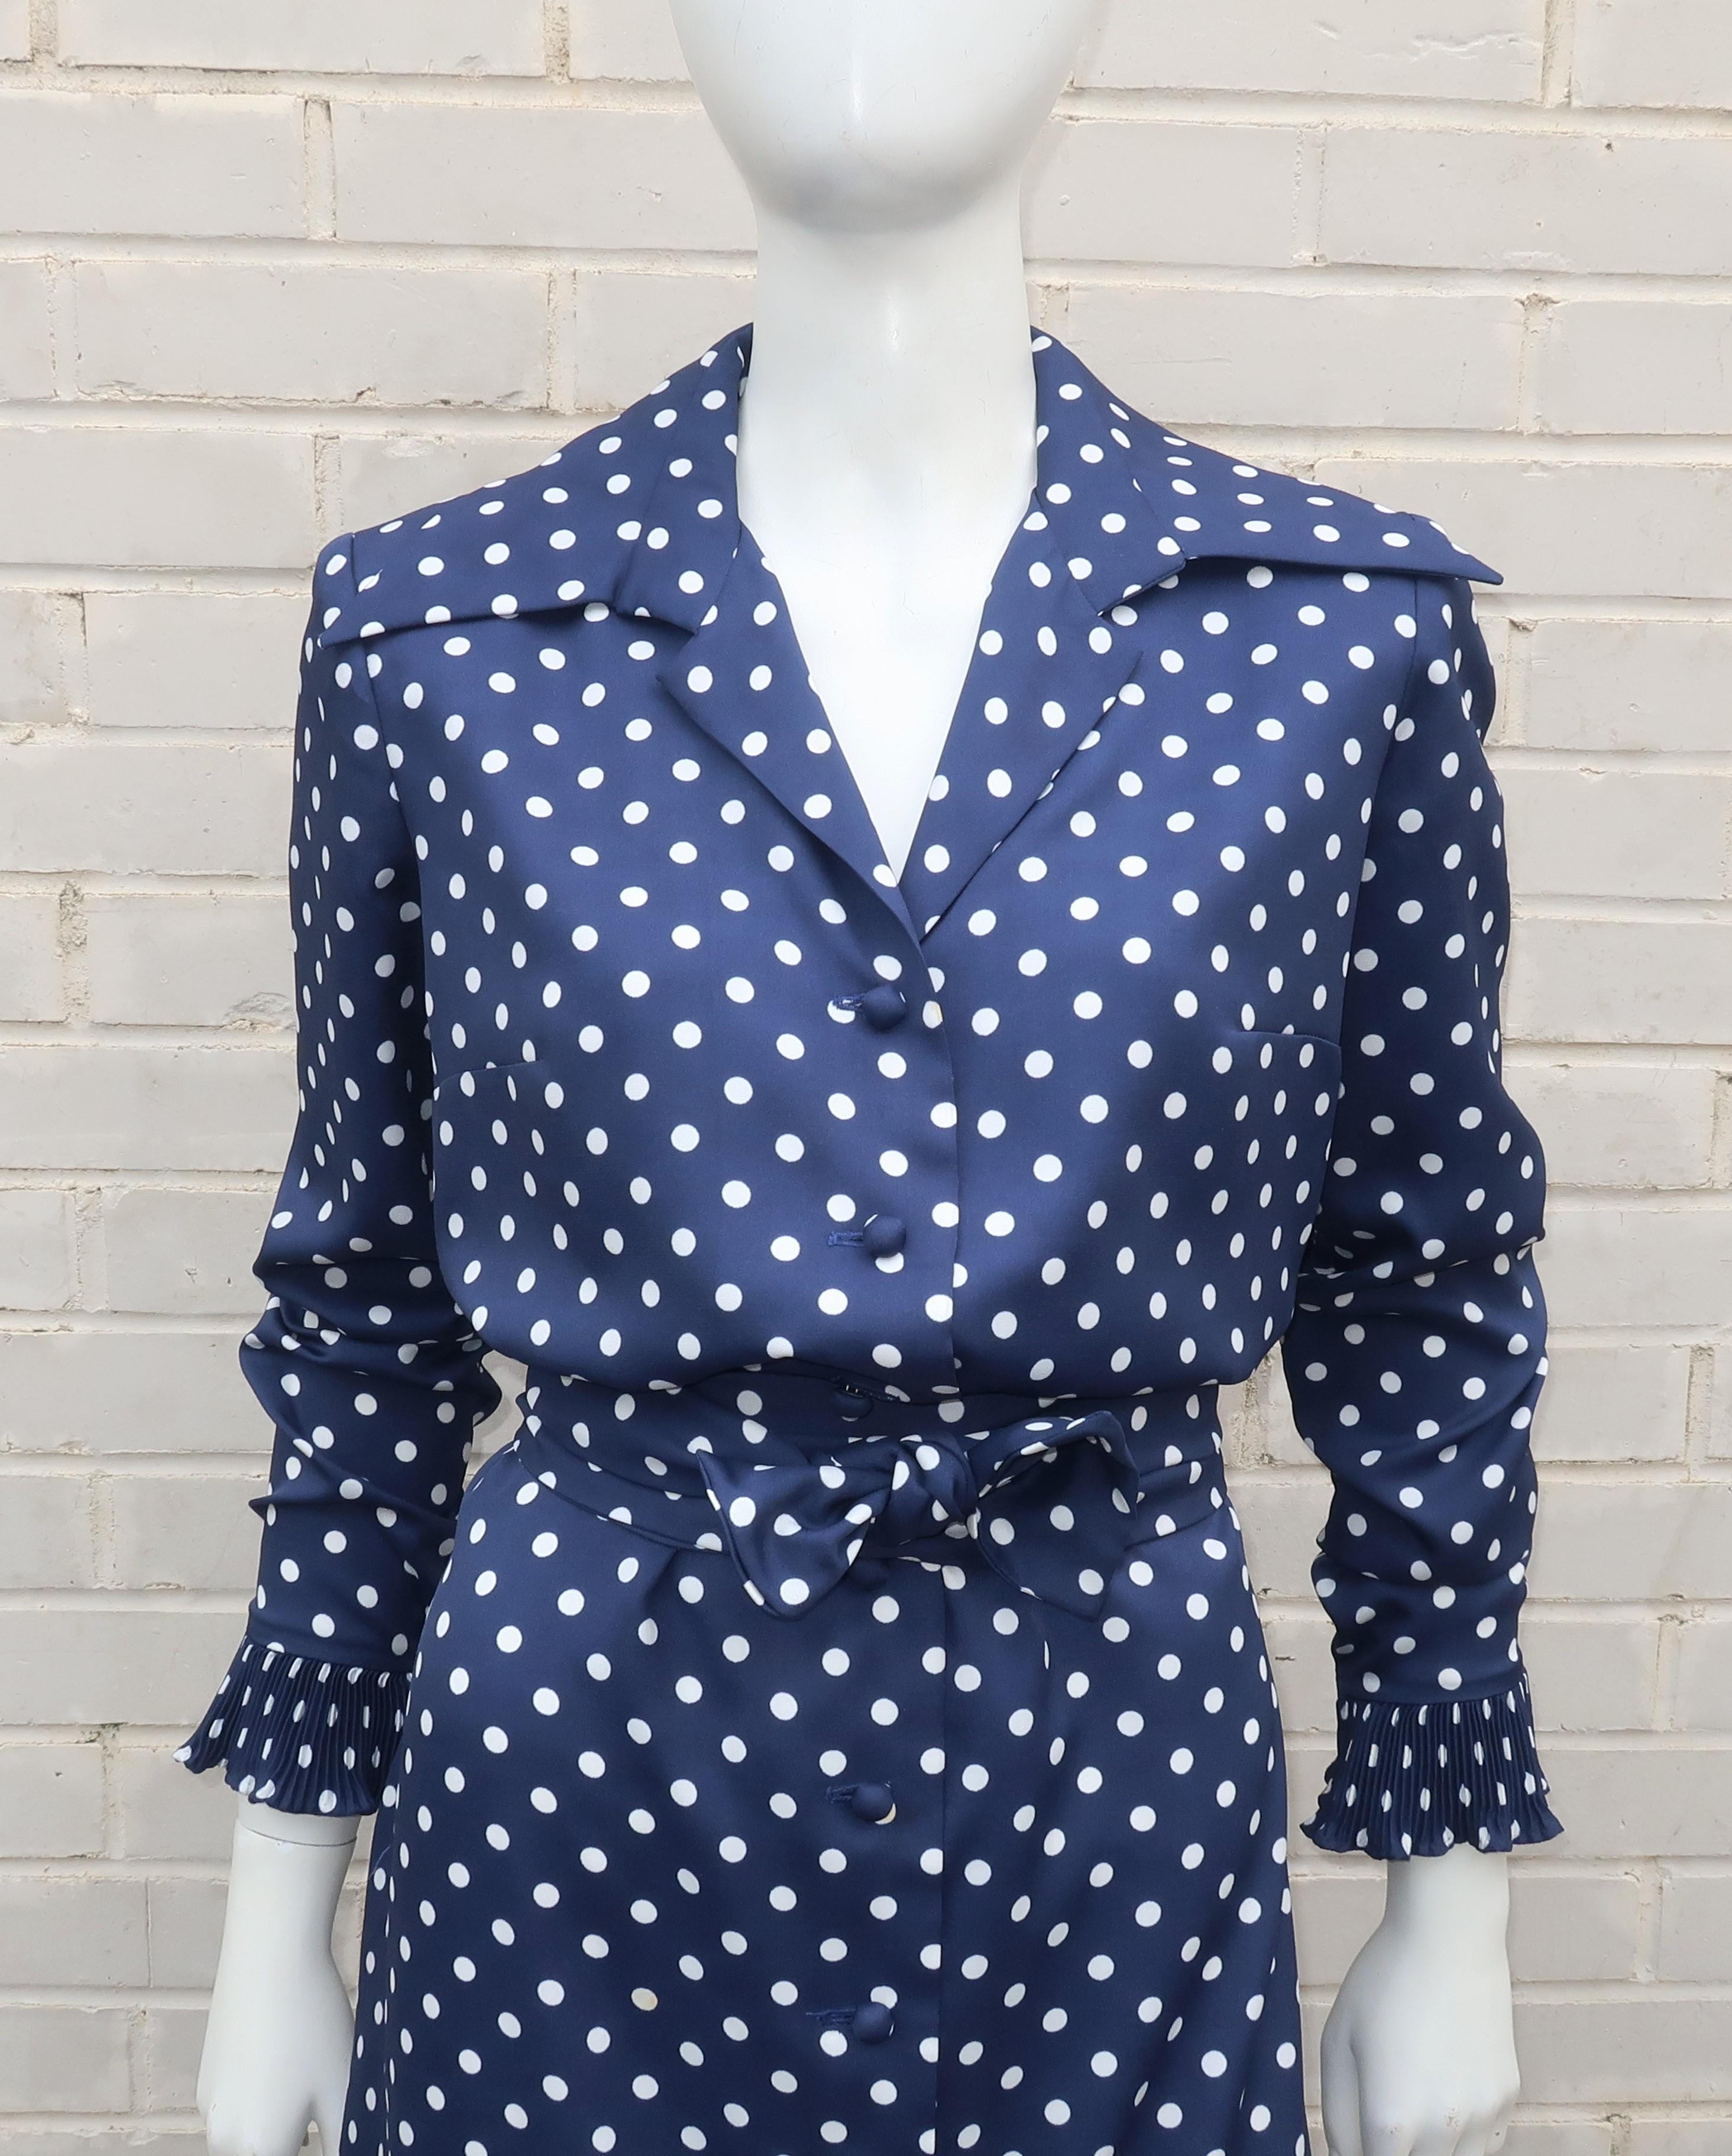 Victor Costa earned a name for himself by designing fashionable and yet affordable apparel with a nod to the higher end American and French designer labels.  This 1970’s day dress is a fun combination of a classic shirt dress silhouette with ultra